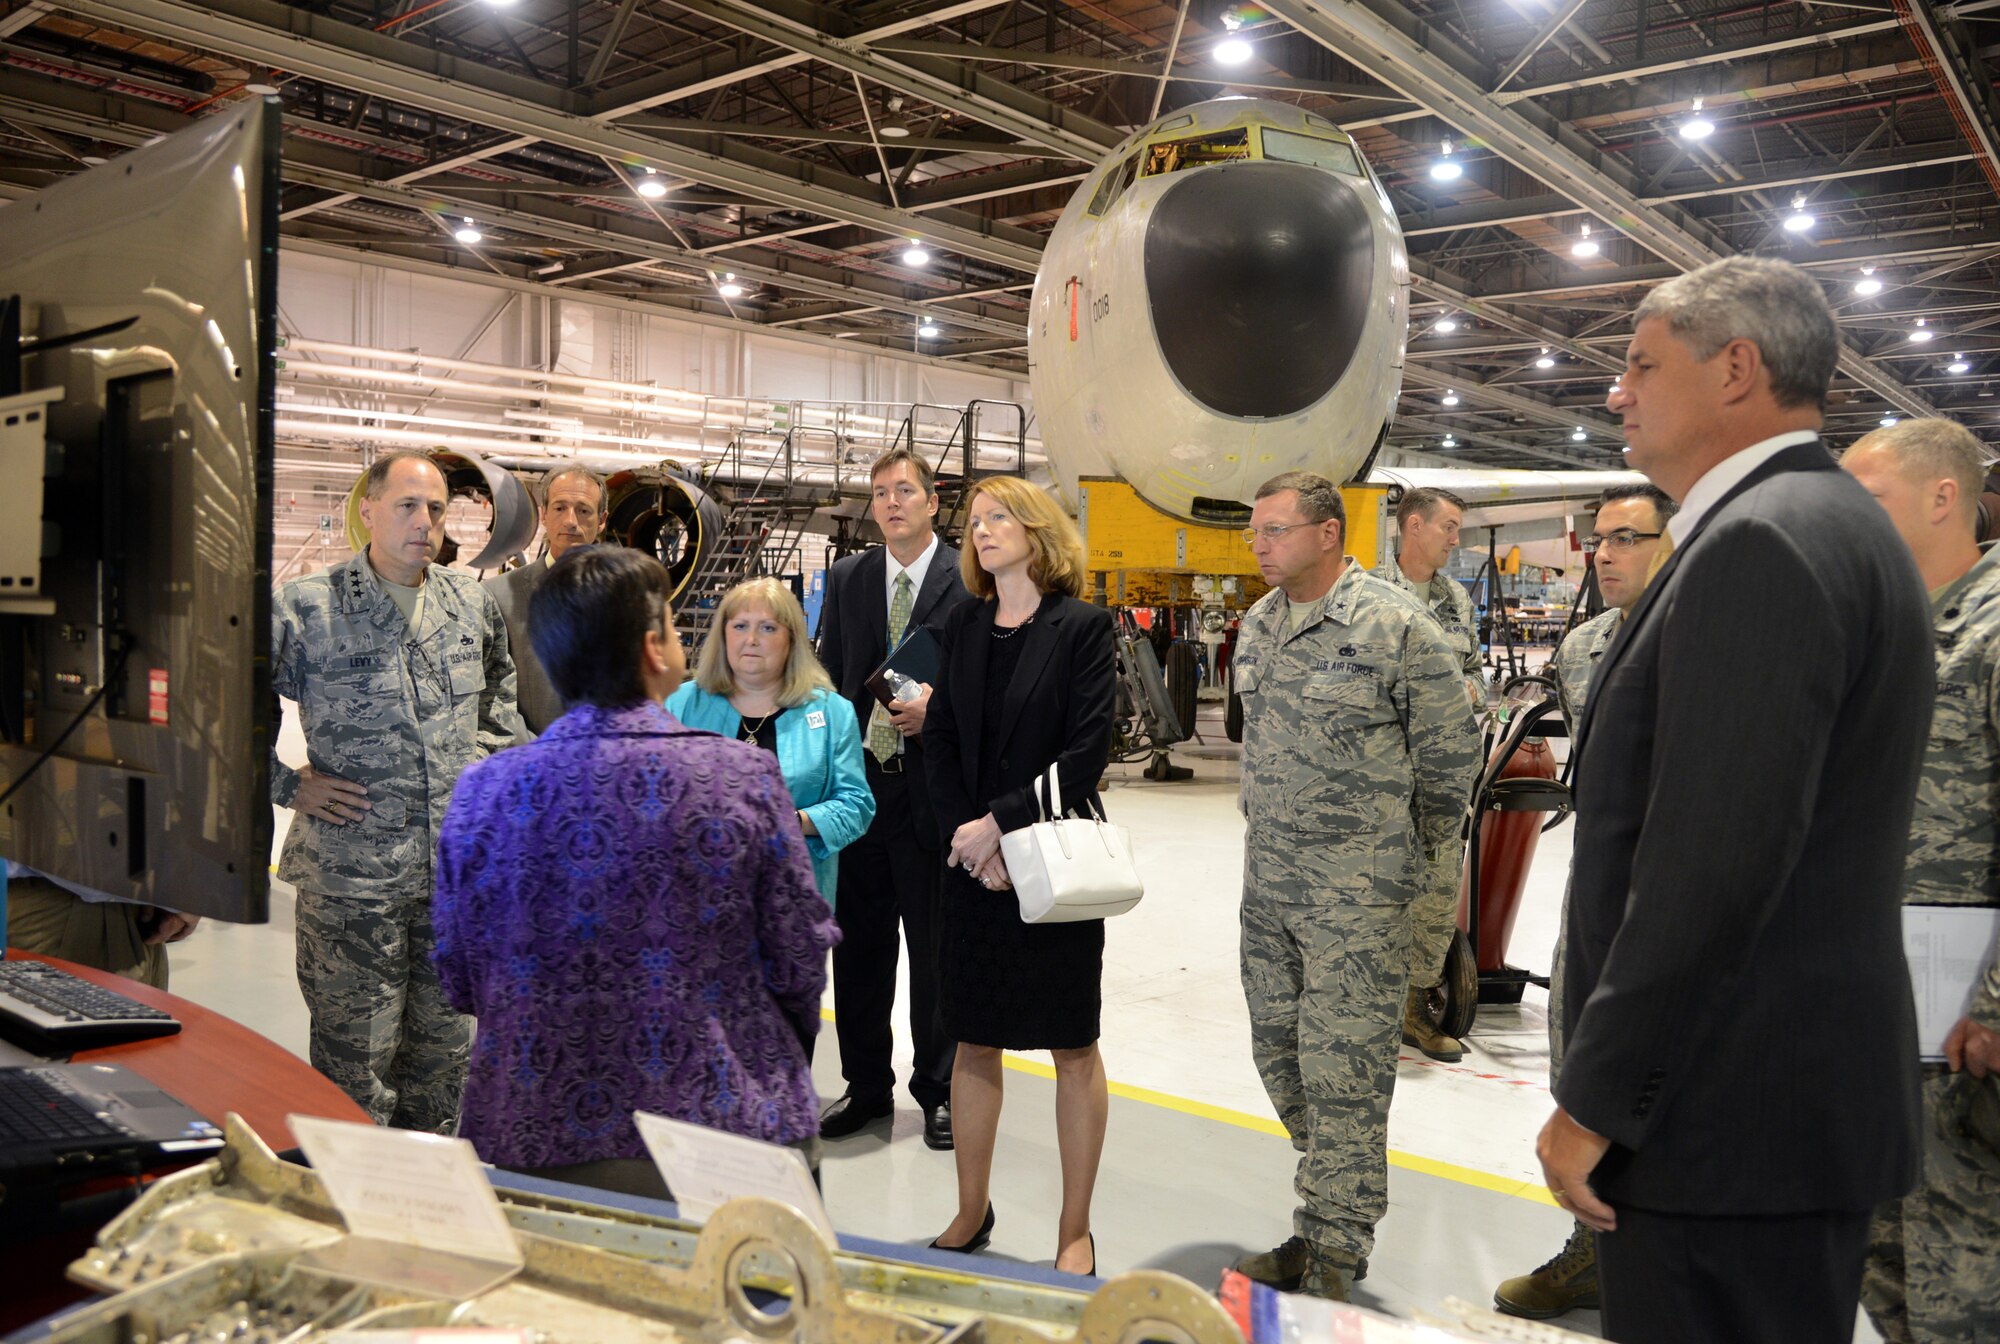 Theresa Farris, director of the 564th Aircraft Maintenance Squadron, briefs The Honorable Lisa Disbrow, the Acting Under Secretary of the Air Force and the Assistant Secretary of the Air Force for Financial Management and Comptroller, (center), and The Honorable William LaPlante, the assistant secretary of the Air Force (Acquisition) (far right), about Tinker's KC-135 programmed depot maintenance program and how utilizing the AFSC Way enables the squadron to deliver combat power to warfighter faster, with higher quality and at less cost than ever before.   Pictured, from left are, Air Force Sustainment Center Commander, Lt. Gen. Lee Levy II; Jerold Smith, Legacy Tanker Chief Engineer; Janis Wood, 76th Aircraft Maintenance Group deputy director; Kevin O'Connor, Oklahoma City Air Logistics Complex vice director; Oklahoma City Air Logistics Complex Commander, Brig. Gen. Mark Johnson; Col. William Liquori, Senior Military Assistant to the Under Secretary of the Air Force; and Lt. Col. Aaron Weiner, Military assistant to the Assistant Secretary of the Air Force (Acquisition). U.S. Air Force photo by Kelly White